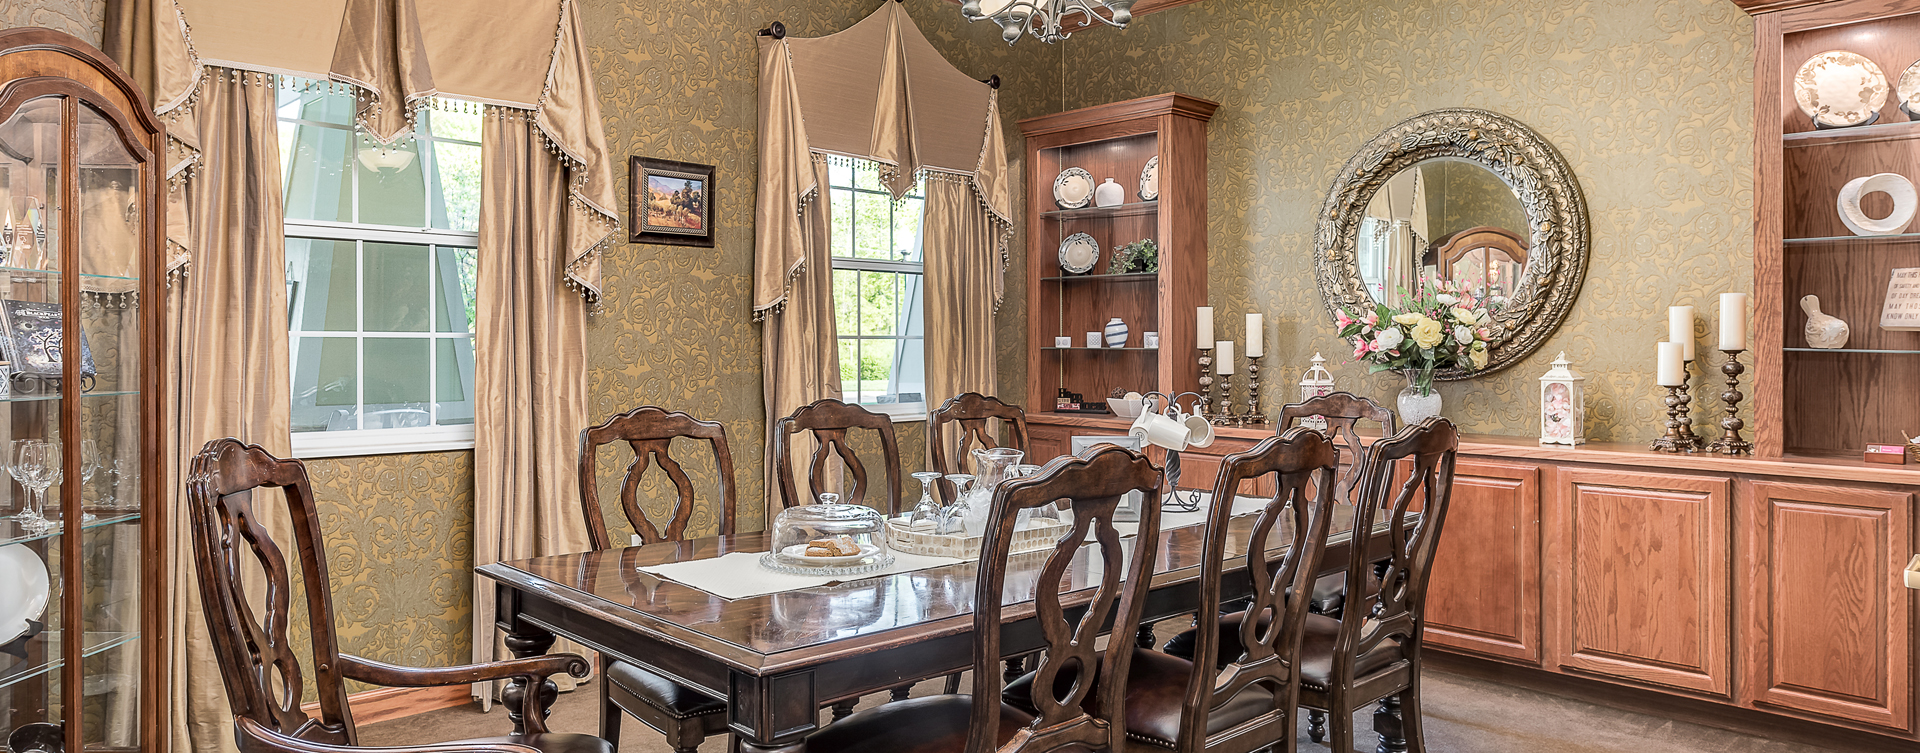 Have fun with themed and holiday meals in the private dining room at Bickford of Midland